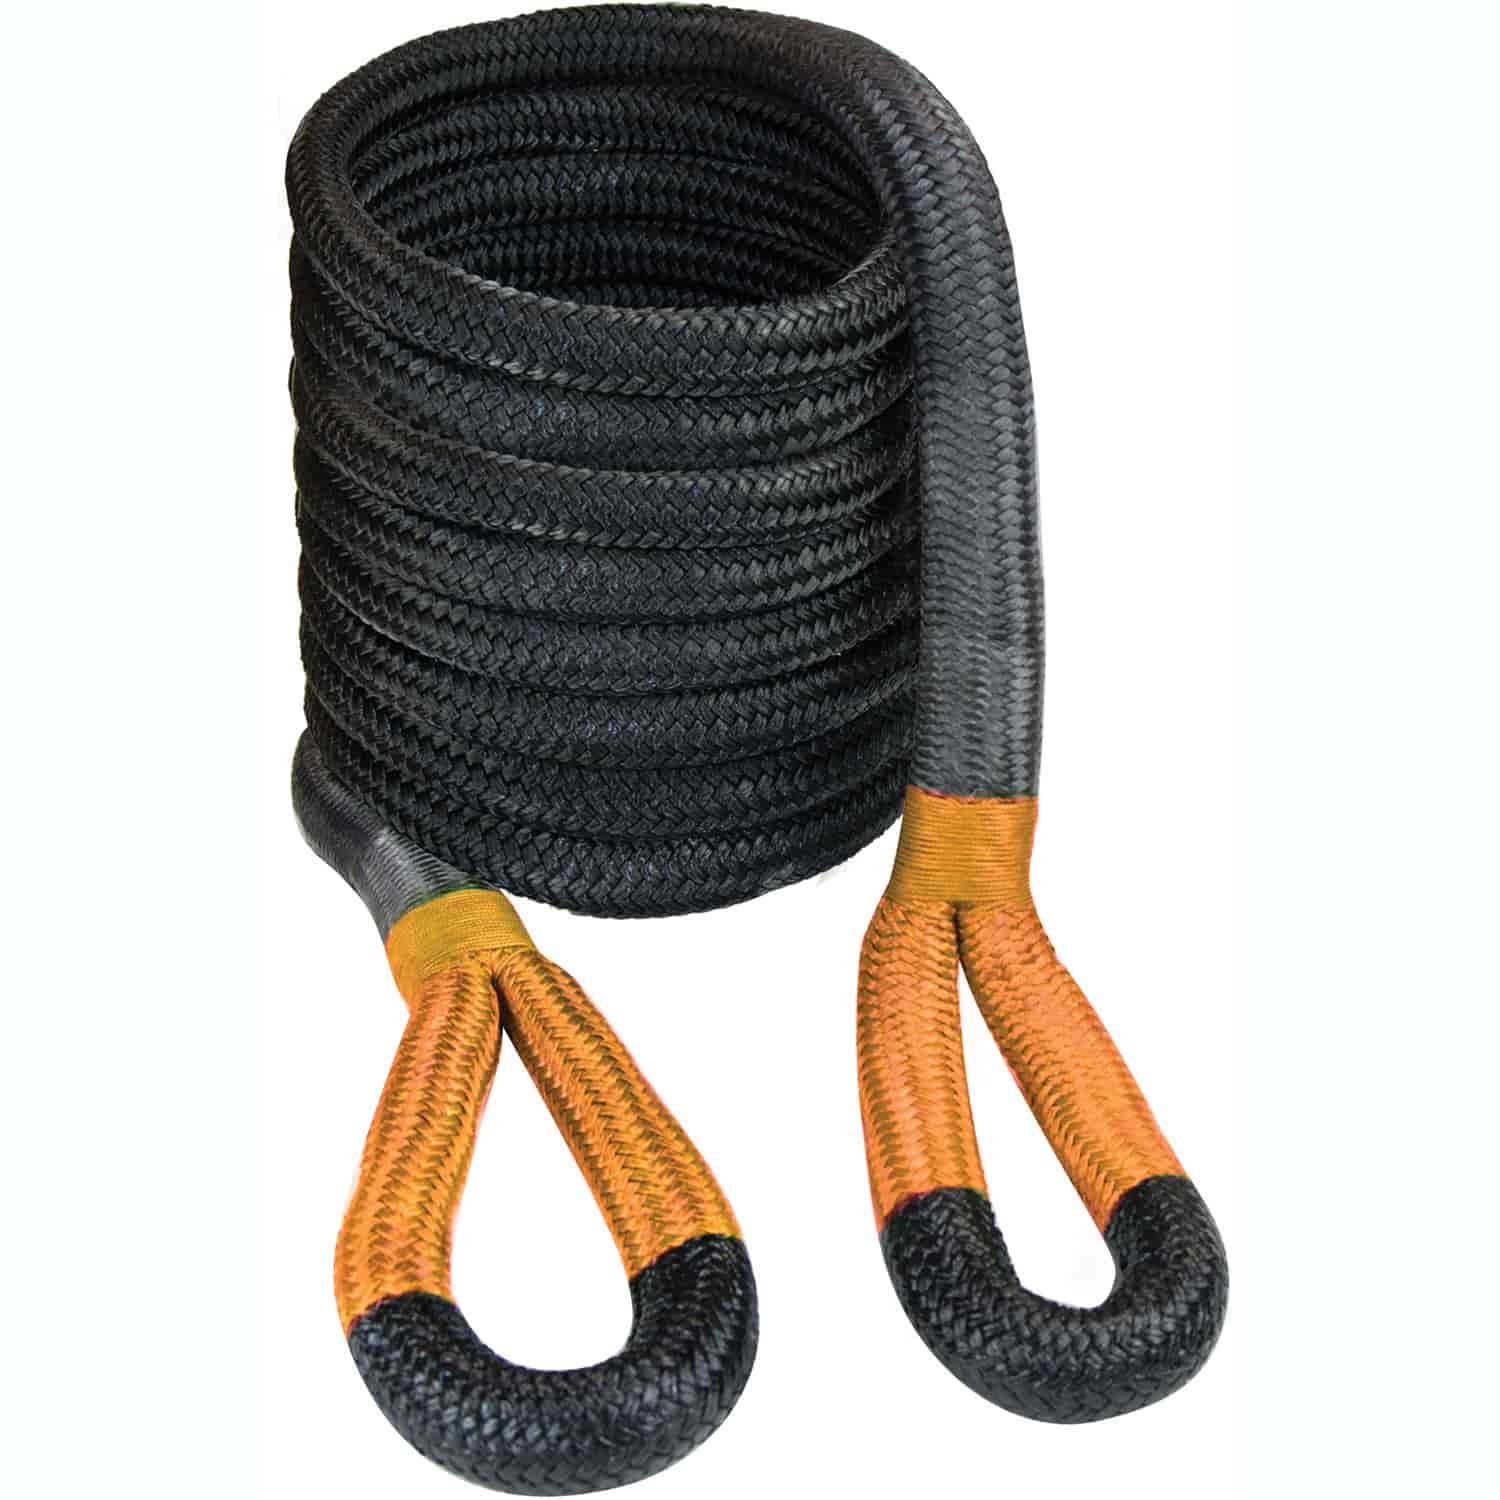 Recovery Rope 1-1/4" X 30' Black Rope with Orange Eyes